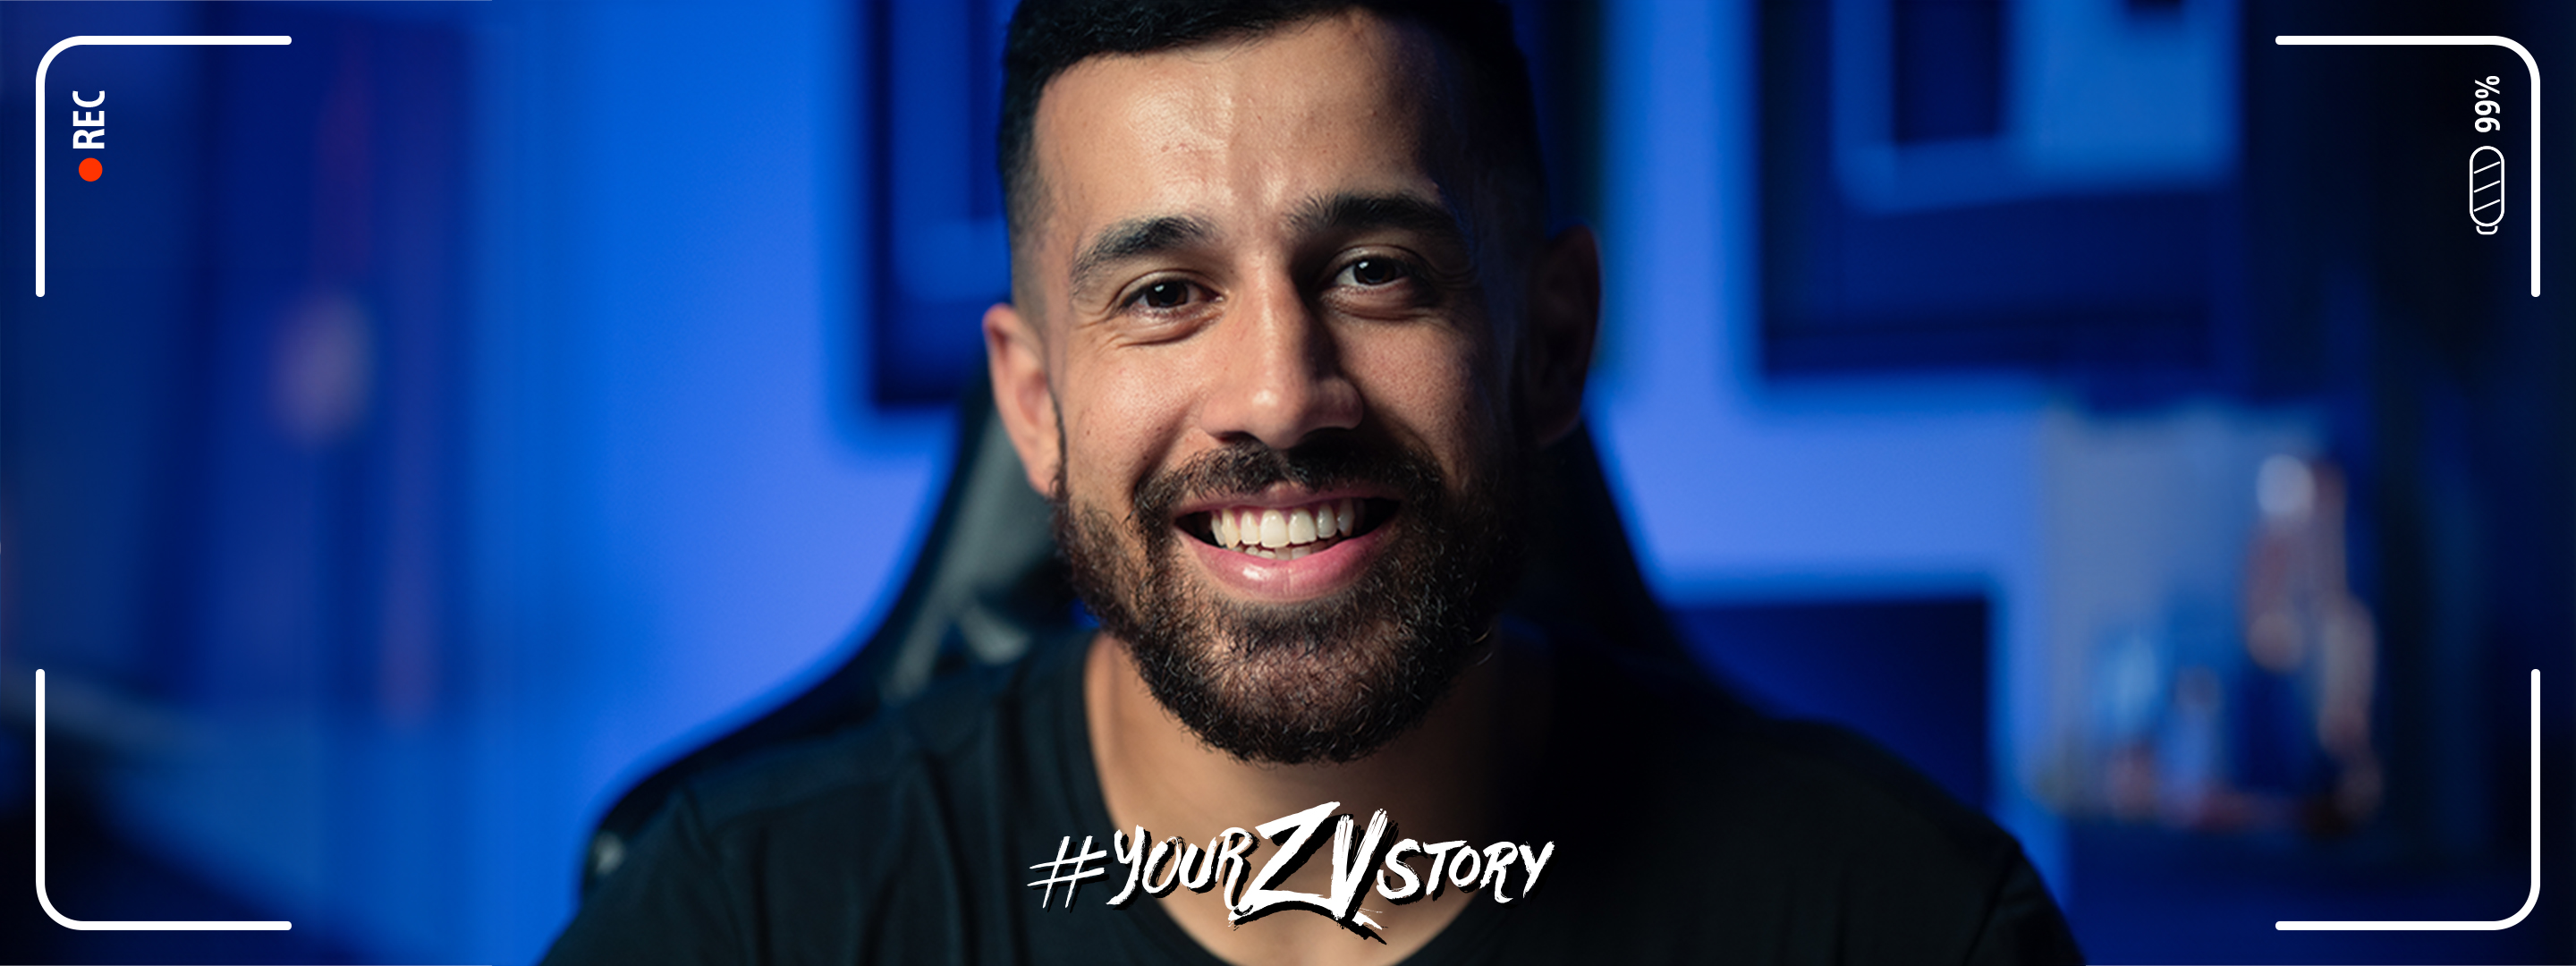 Jordan shares his unique world with YourZVStory